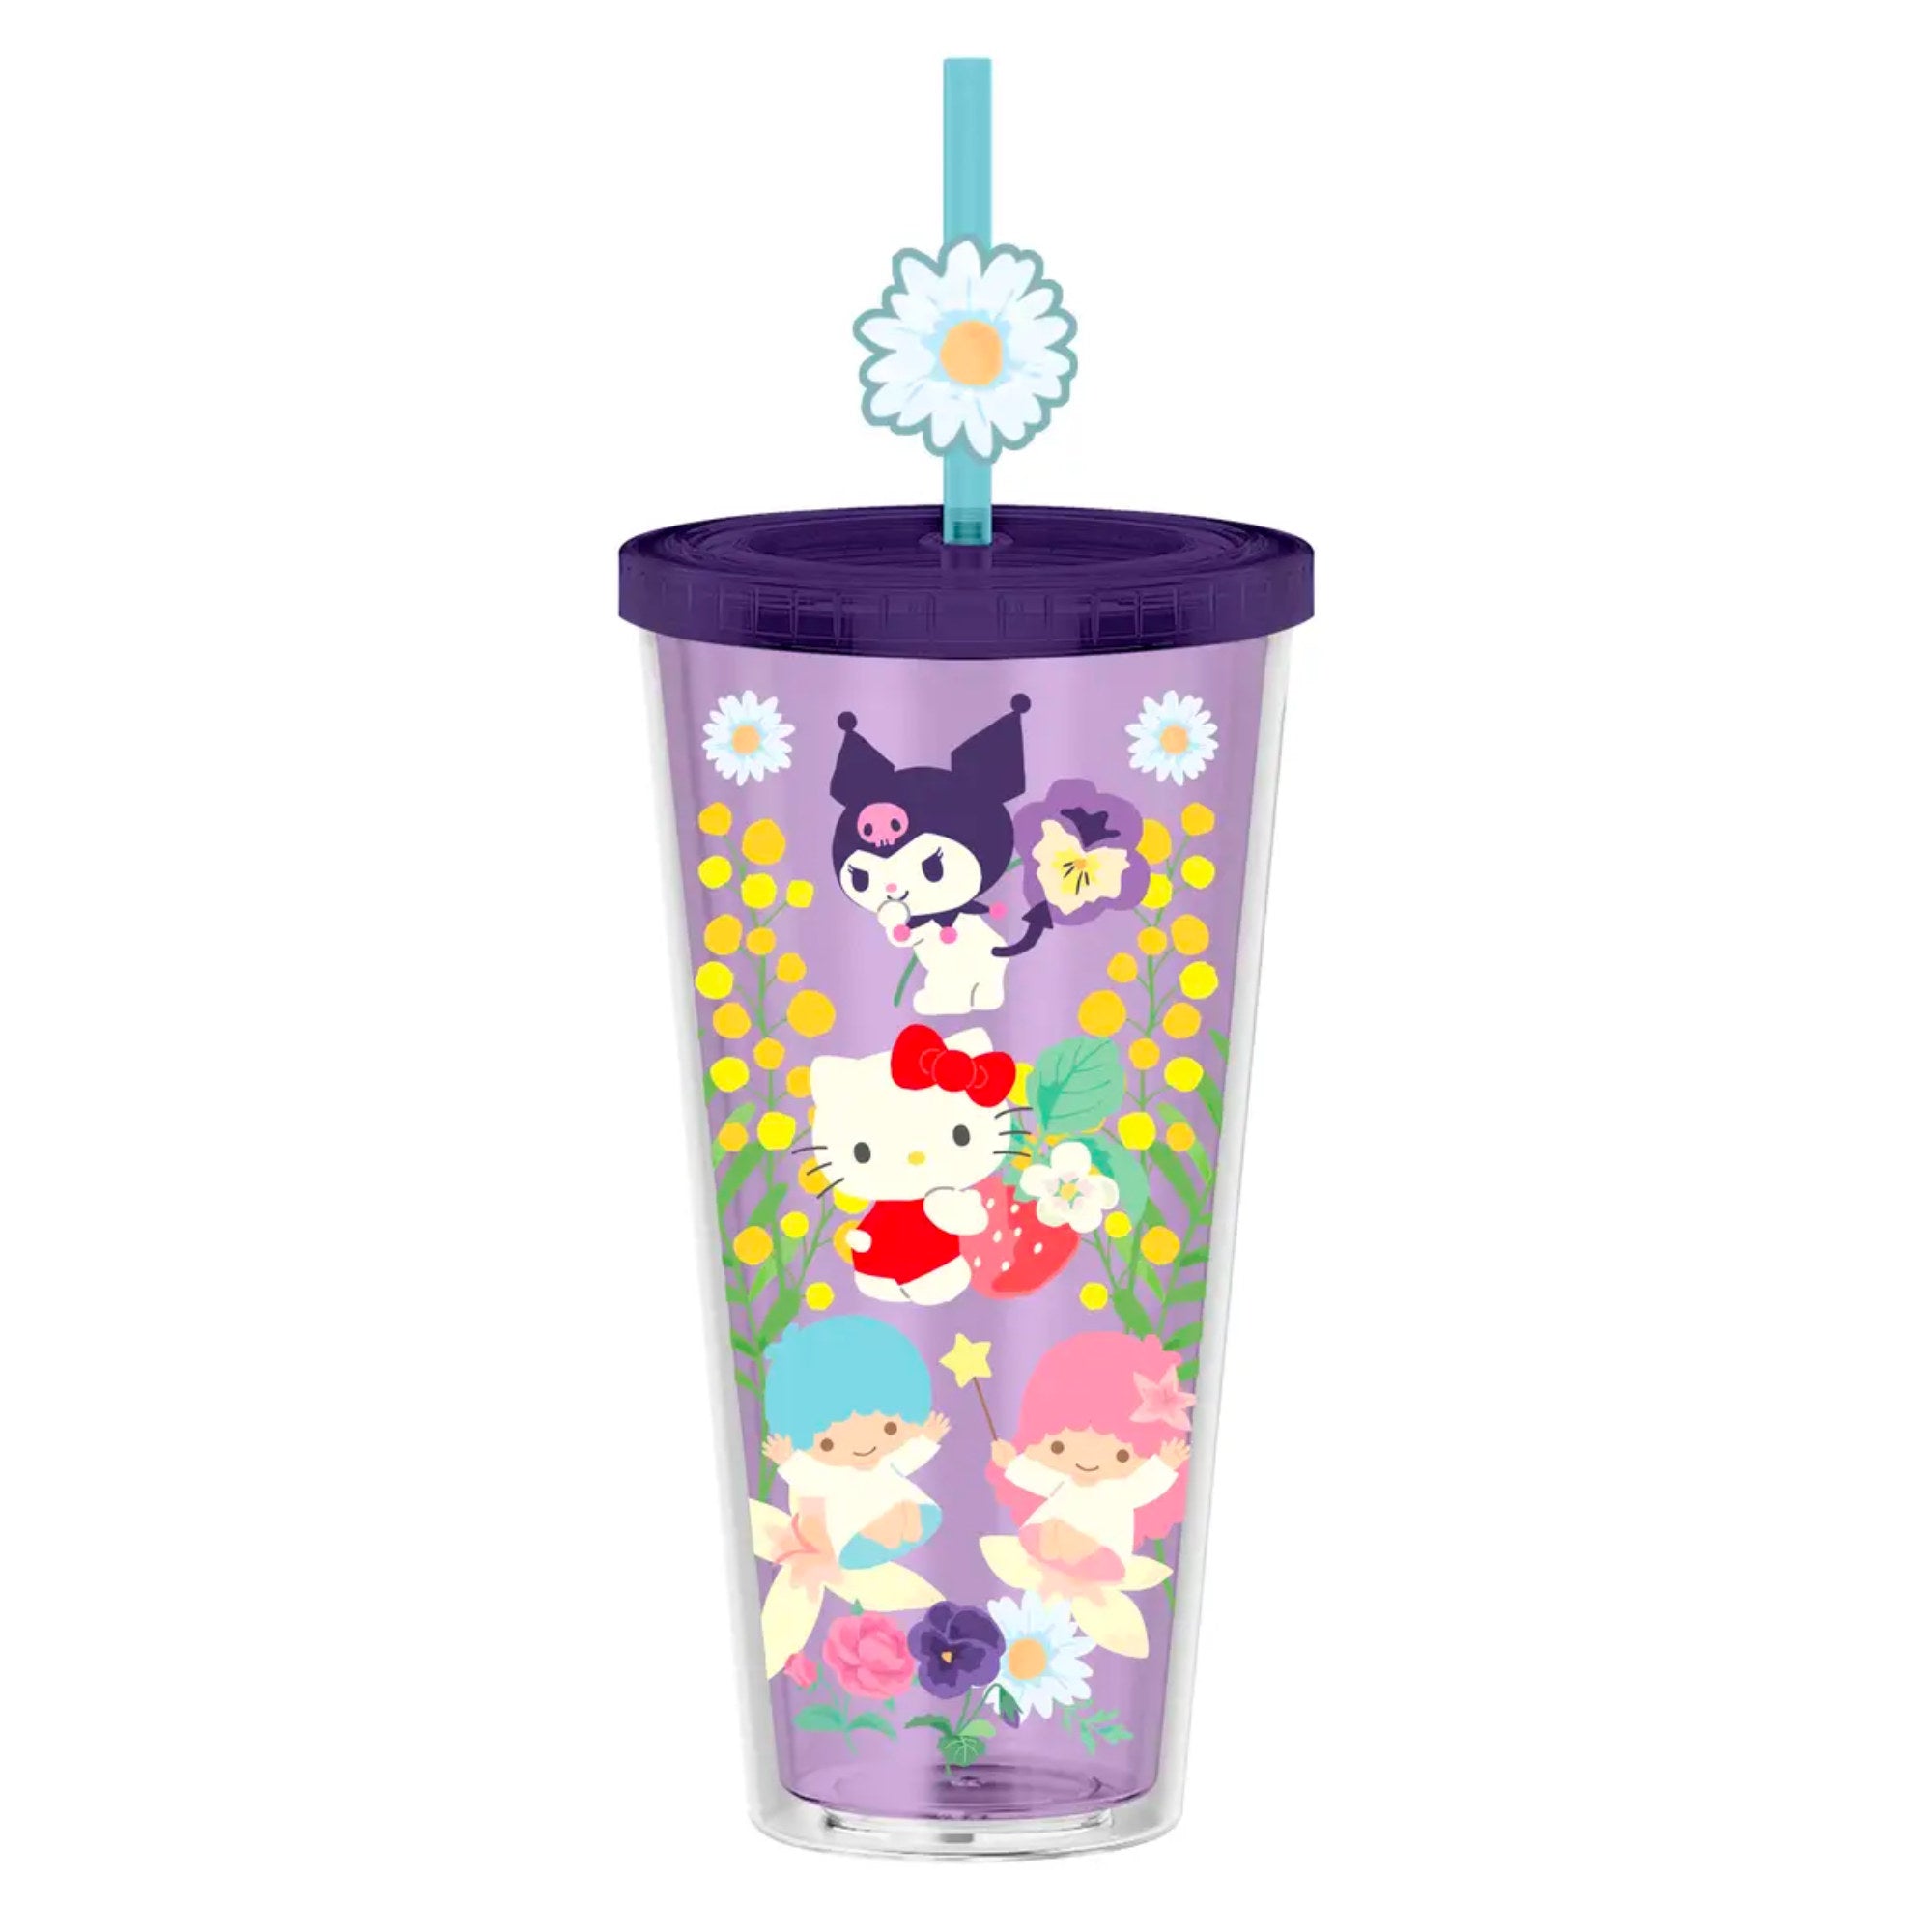 Sanrio 24oz. Plastic Cold Cup w/ Lid and Topper Straw